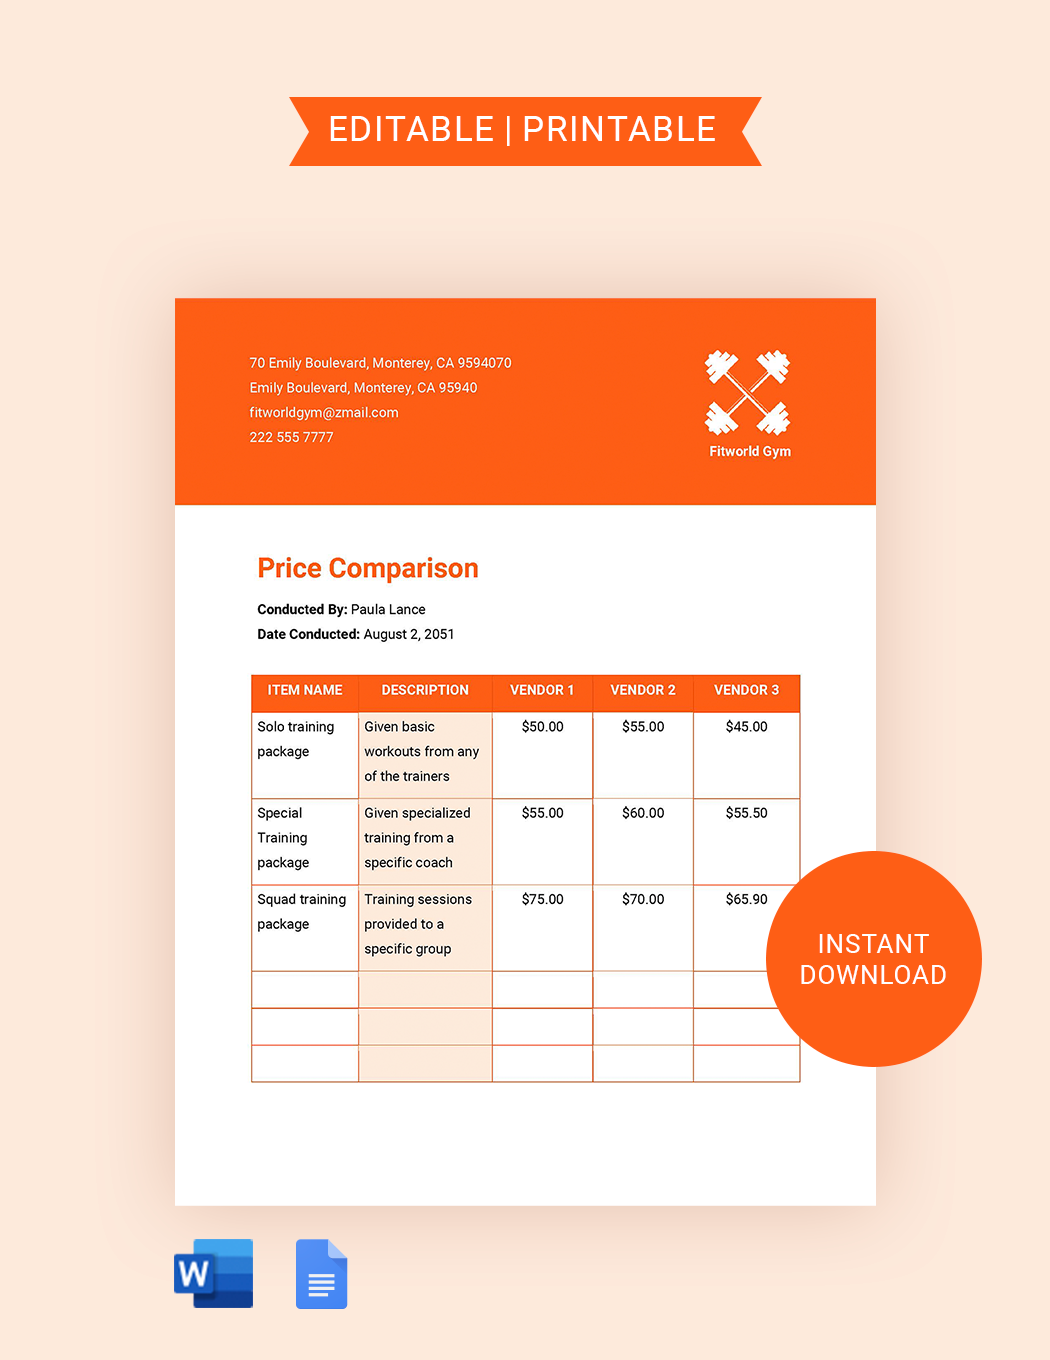 Fitness Club Price Comparison Template in Word, Google Docs